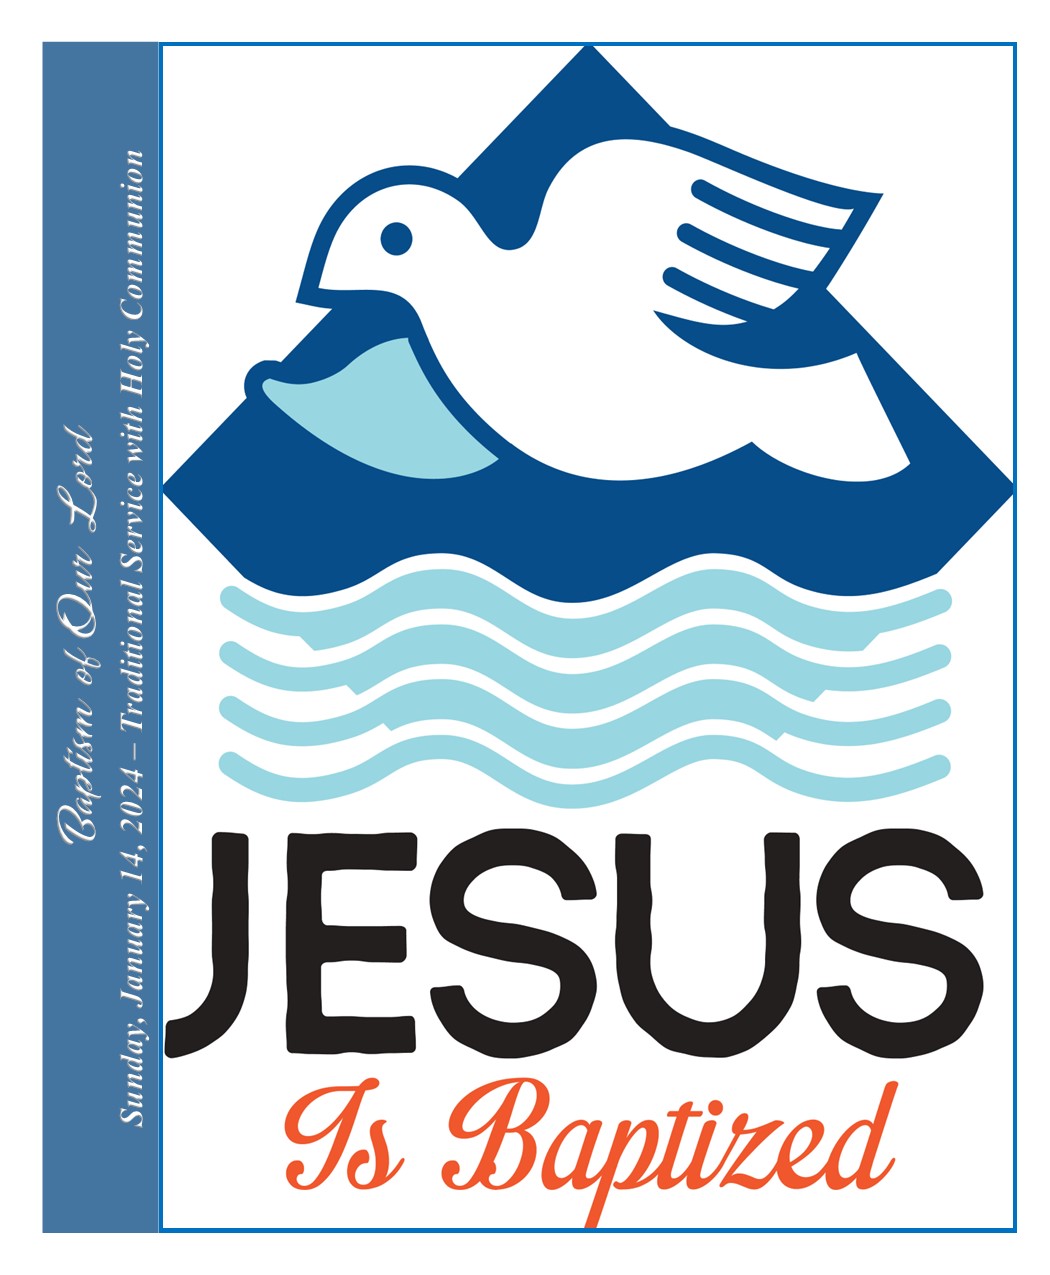 Streamed Worship Service – Baptism of Our Lord